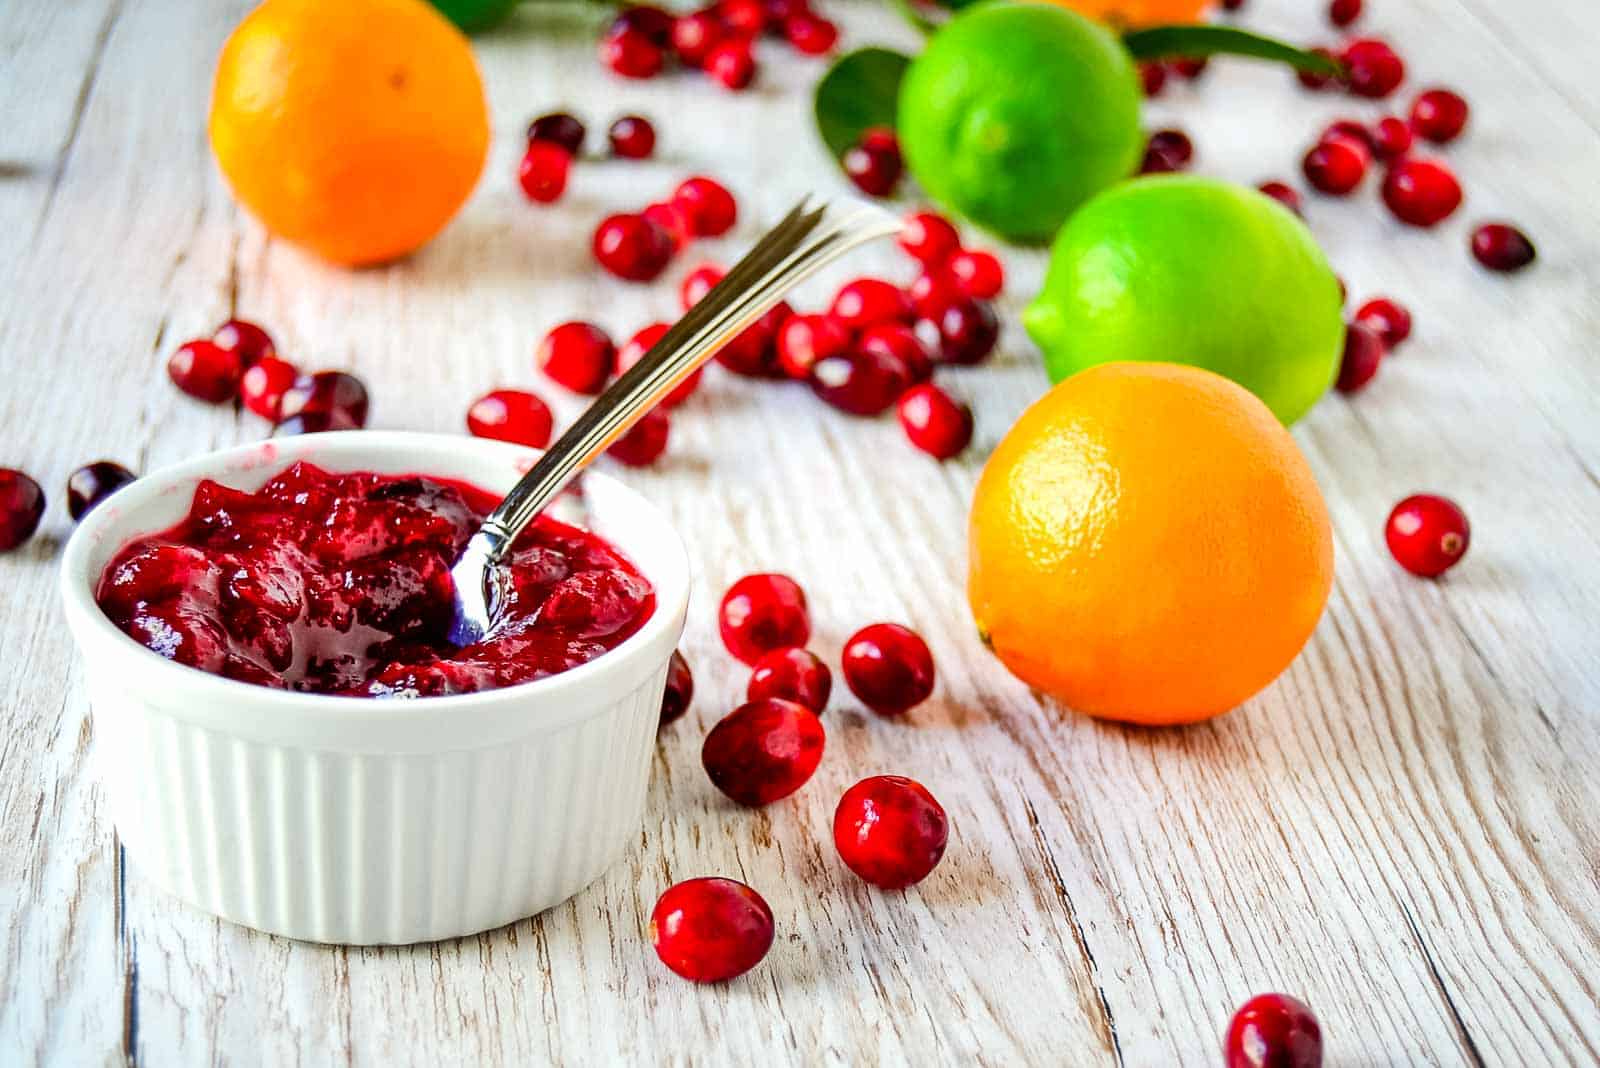 A bowl of cranberry sauce with cranberries, oranges and lemons.